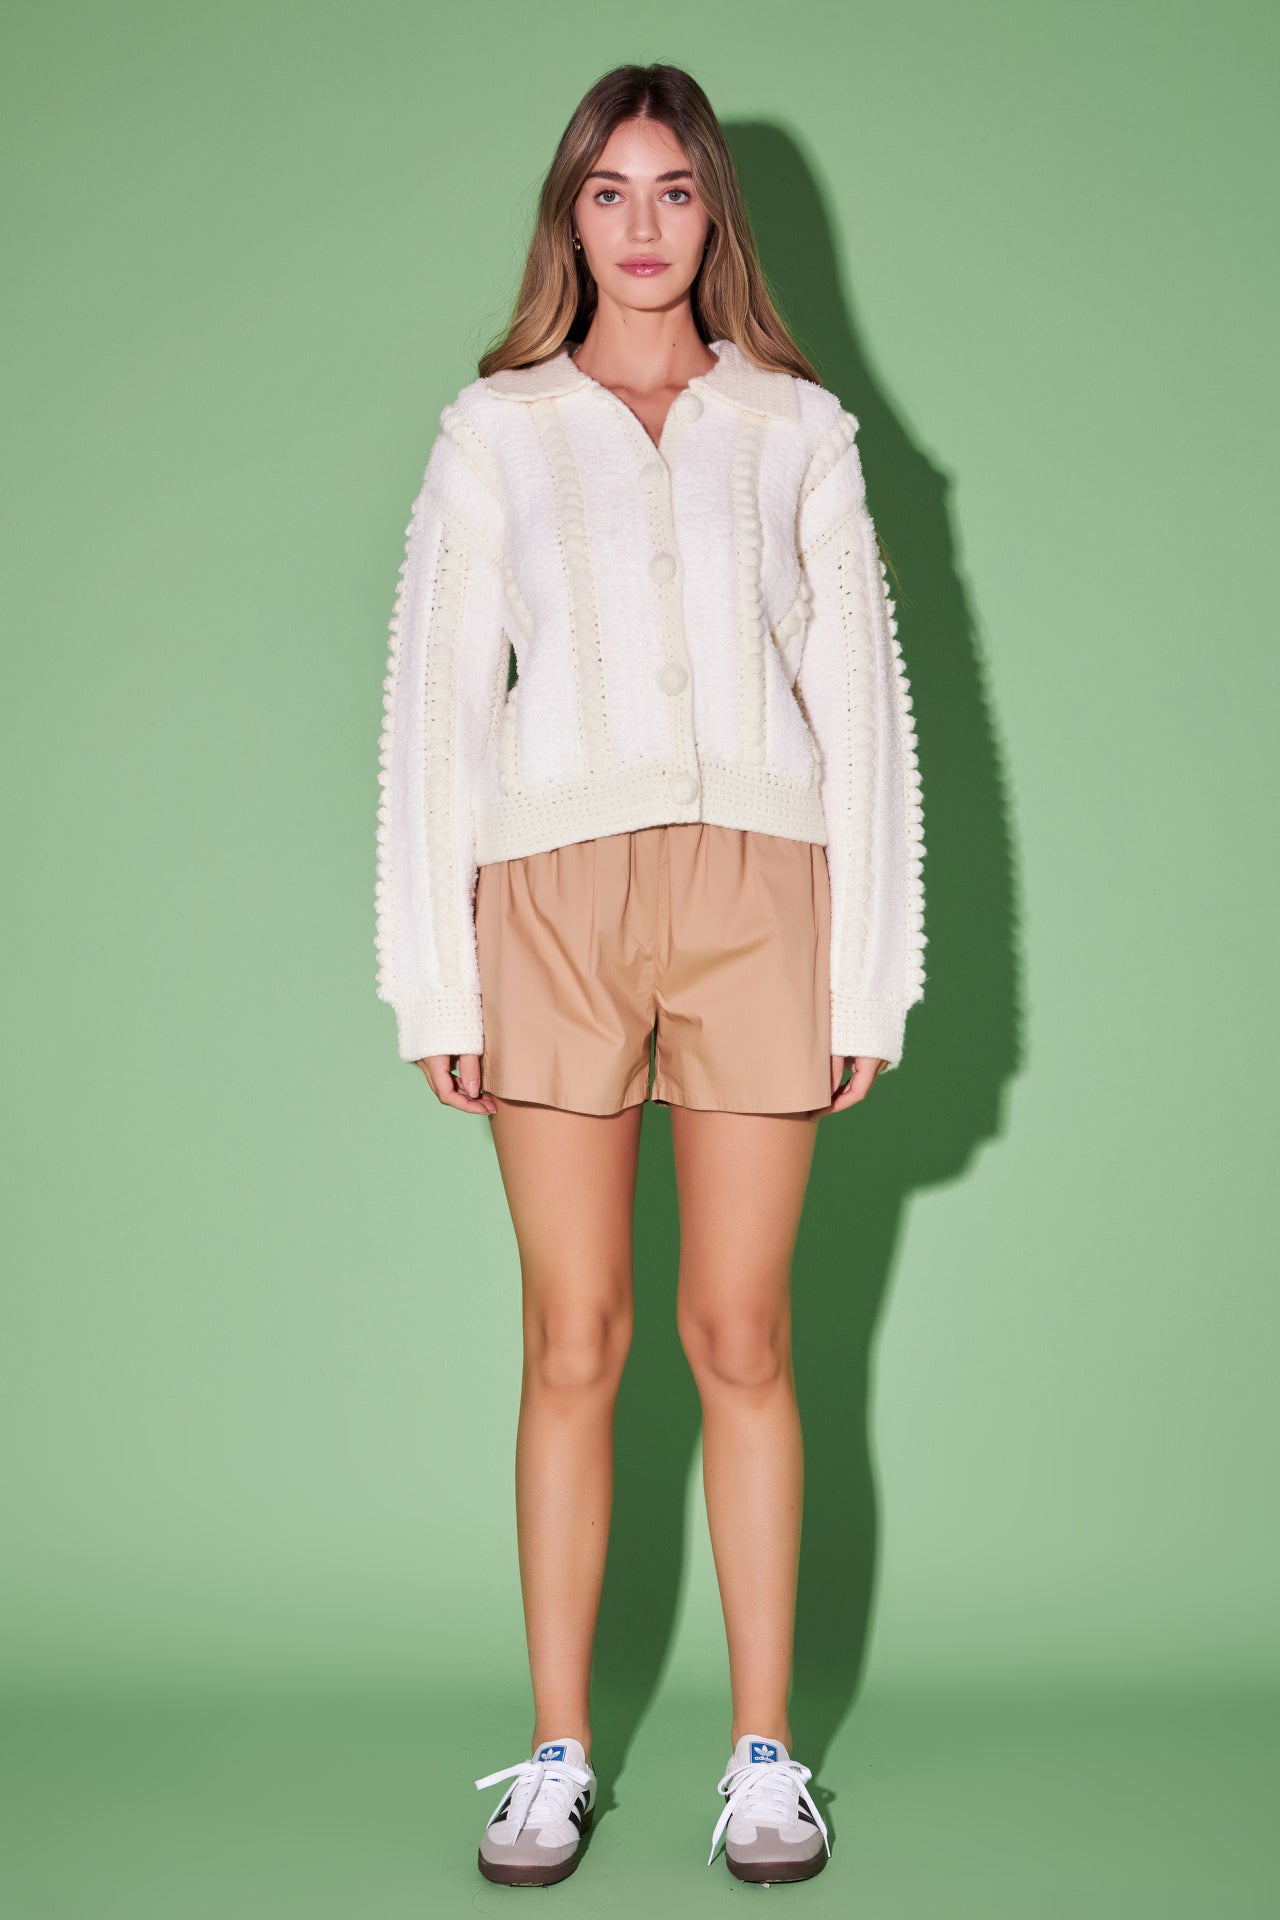 ENGLISH FACTORY - Premium Handmade Pom Pom Cardigan - SWEATERS & KNITS available at Objectrare